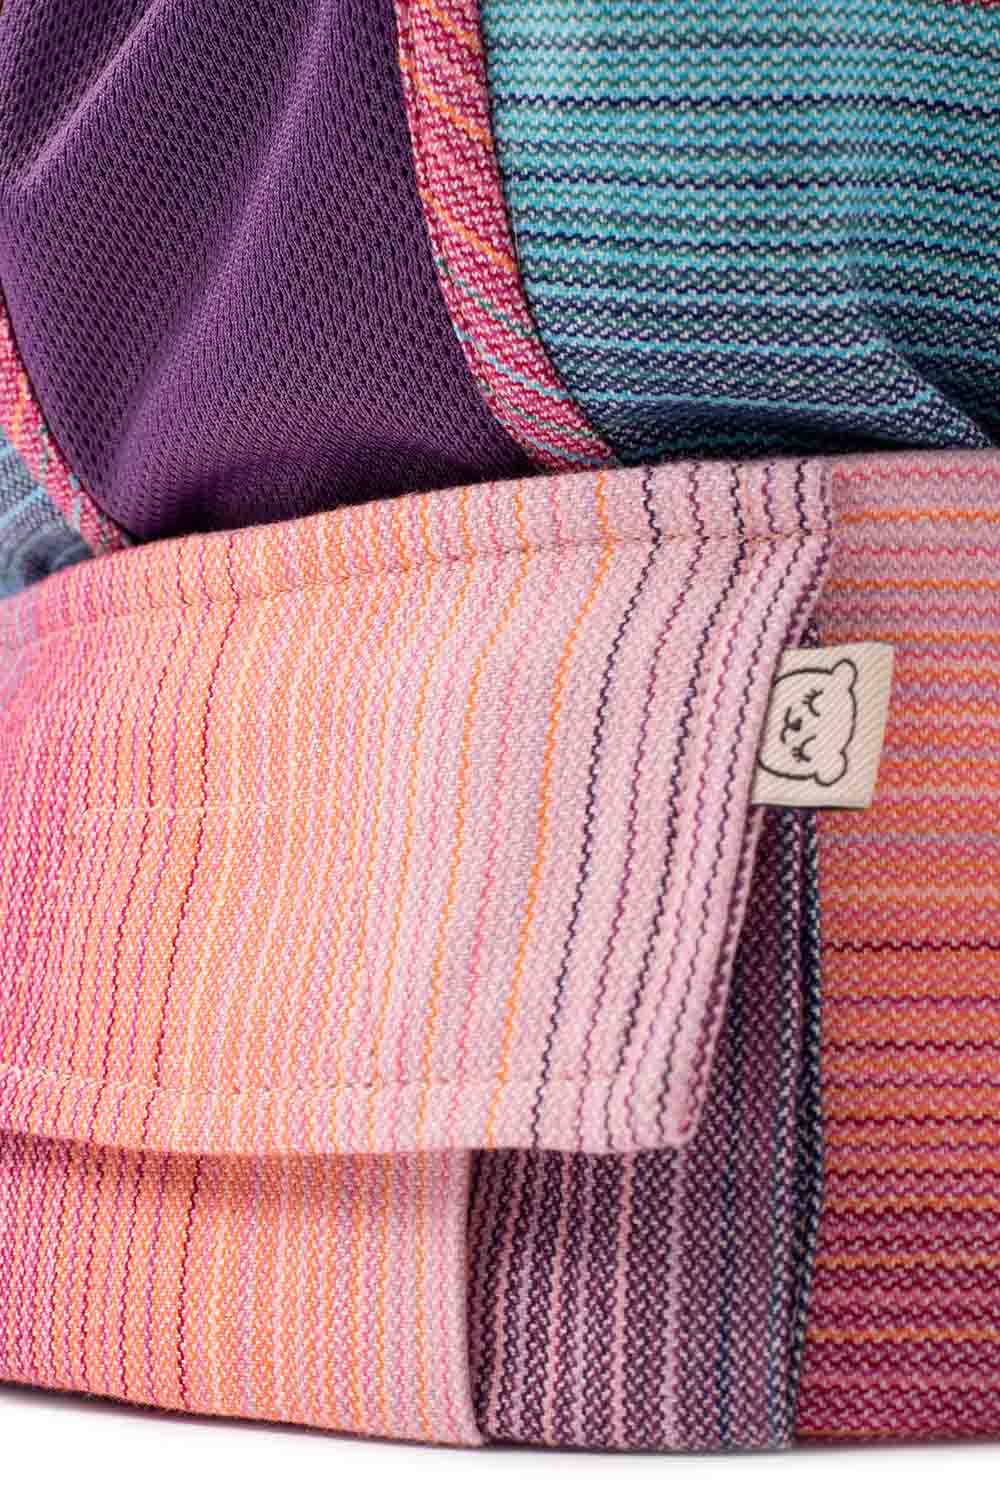 Rose - Signature Handwoven Explore Baby Carrier